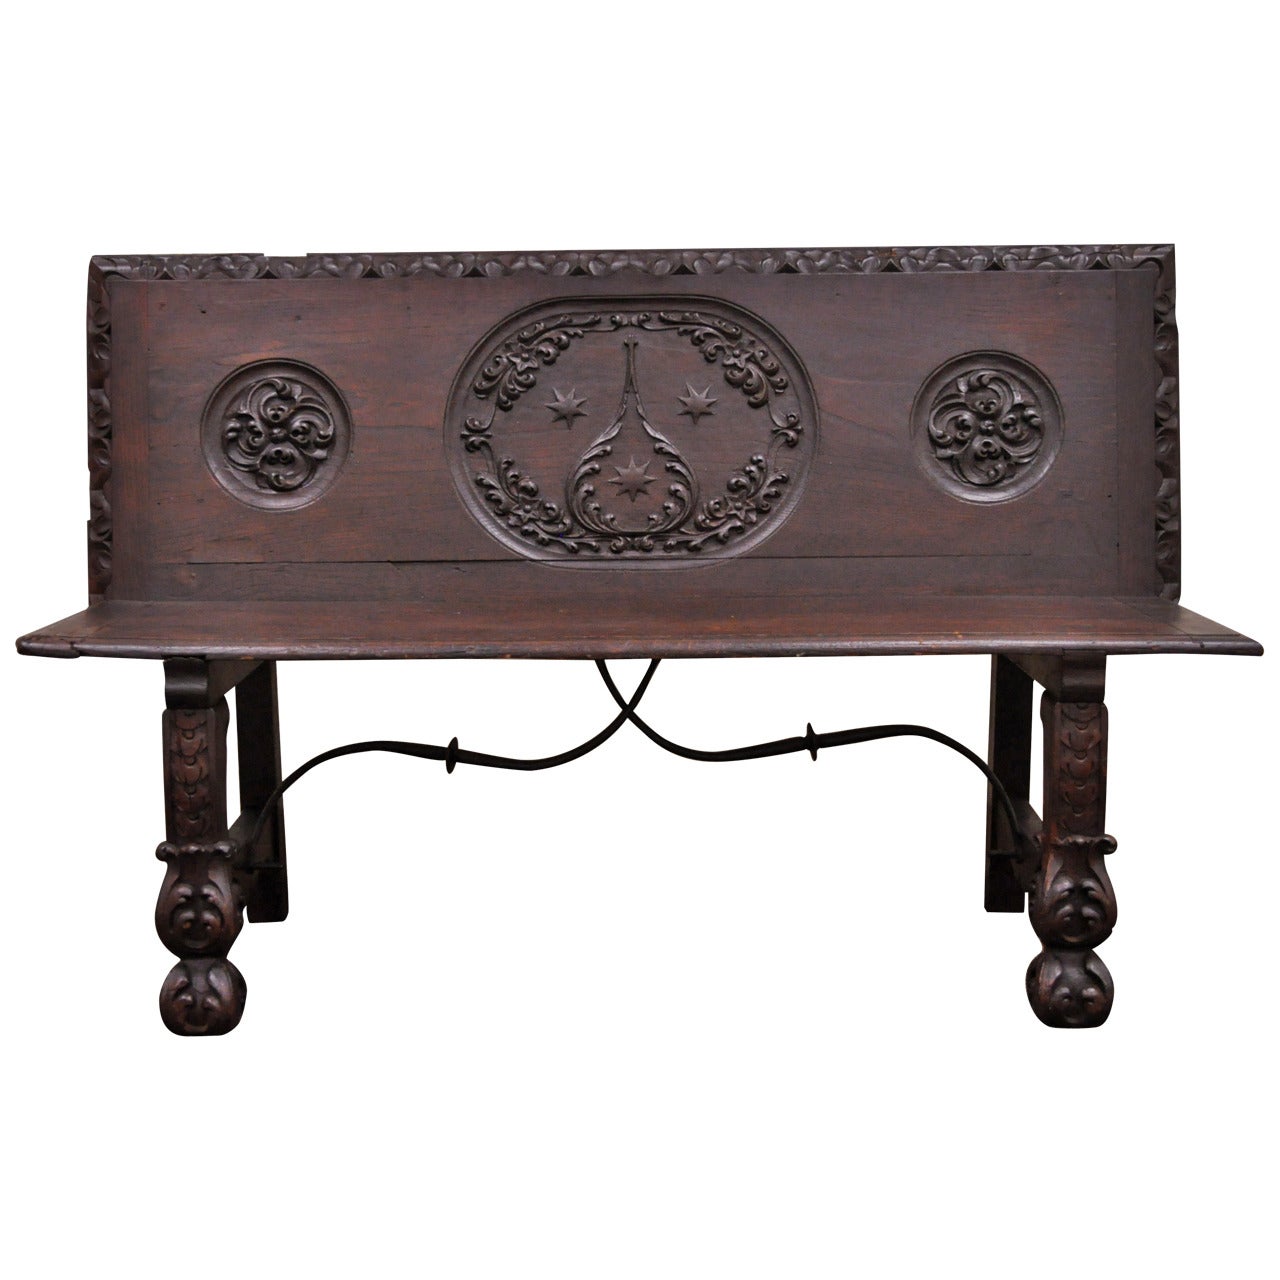 17th Century English Renaissance Carved Oak and Wrought Iron Bench Banquette For Sale